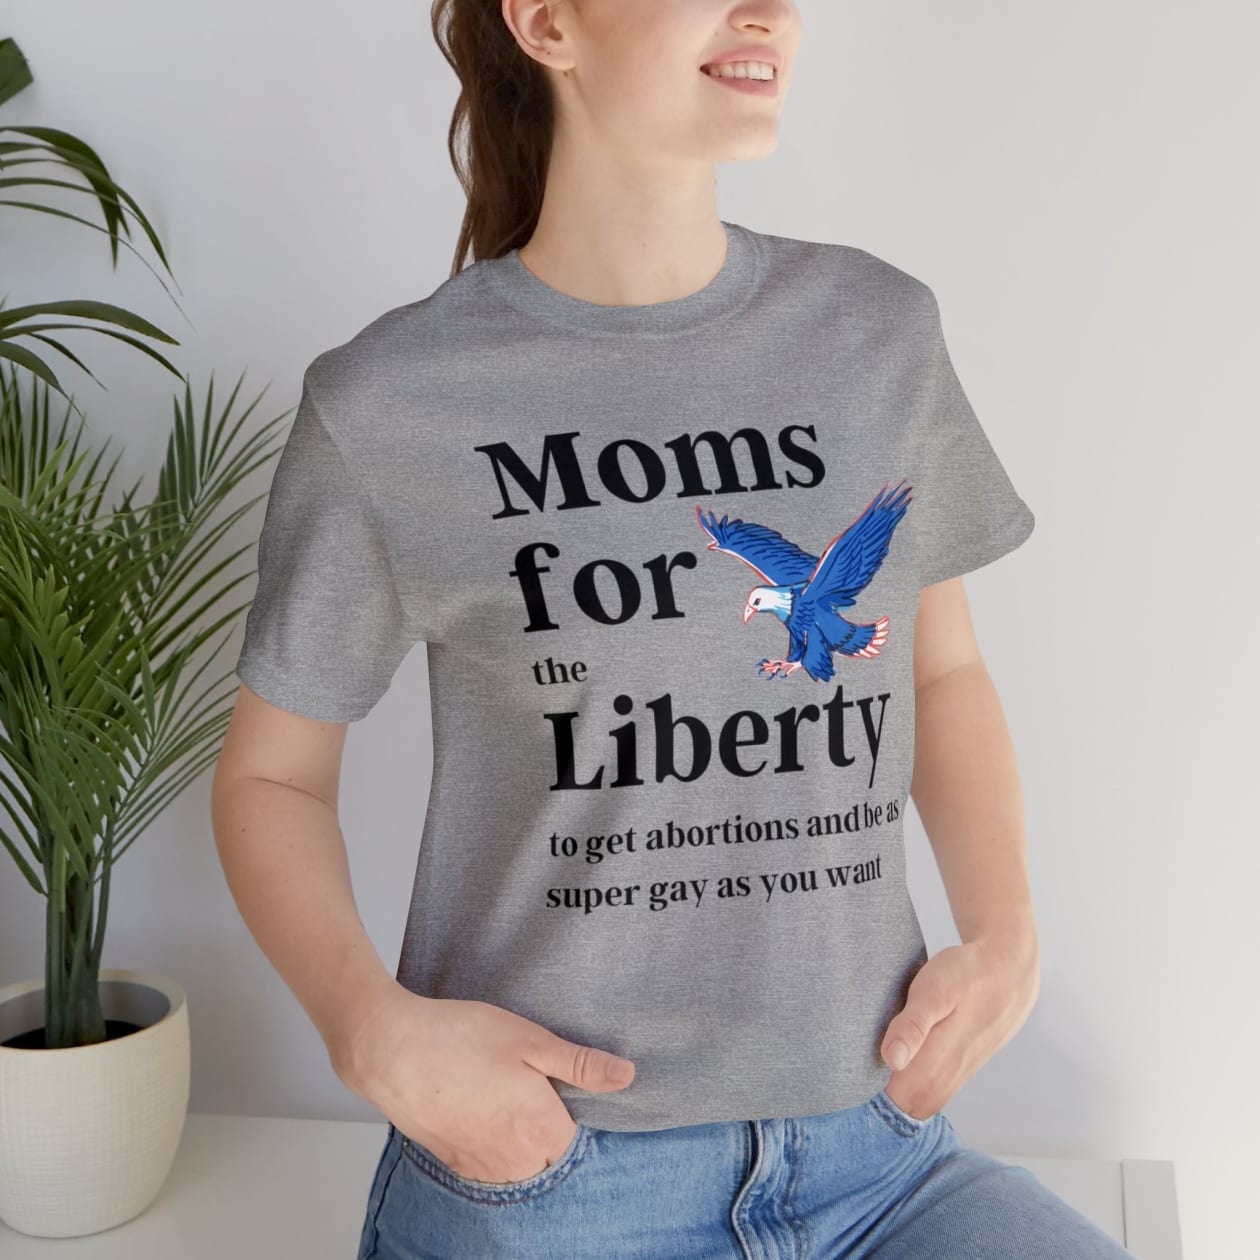 [SATIRE] Moms for (the) Liberty (to get abortions and be as super gay as you want) Unisex Short Sleeve Tee [Multiple Color Options] - Sizes: S, Colors: Athletic Heather